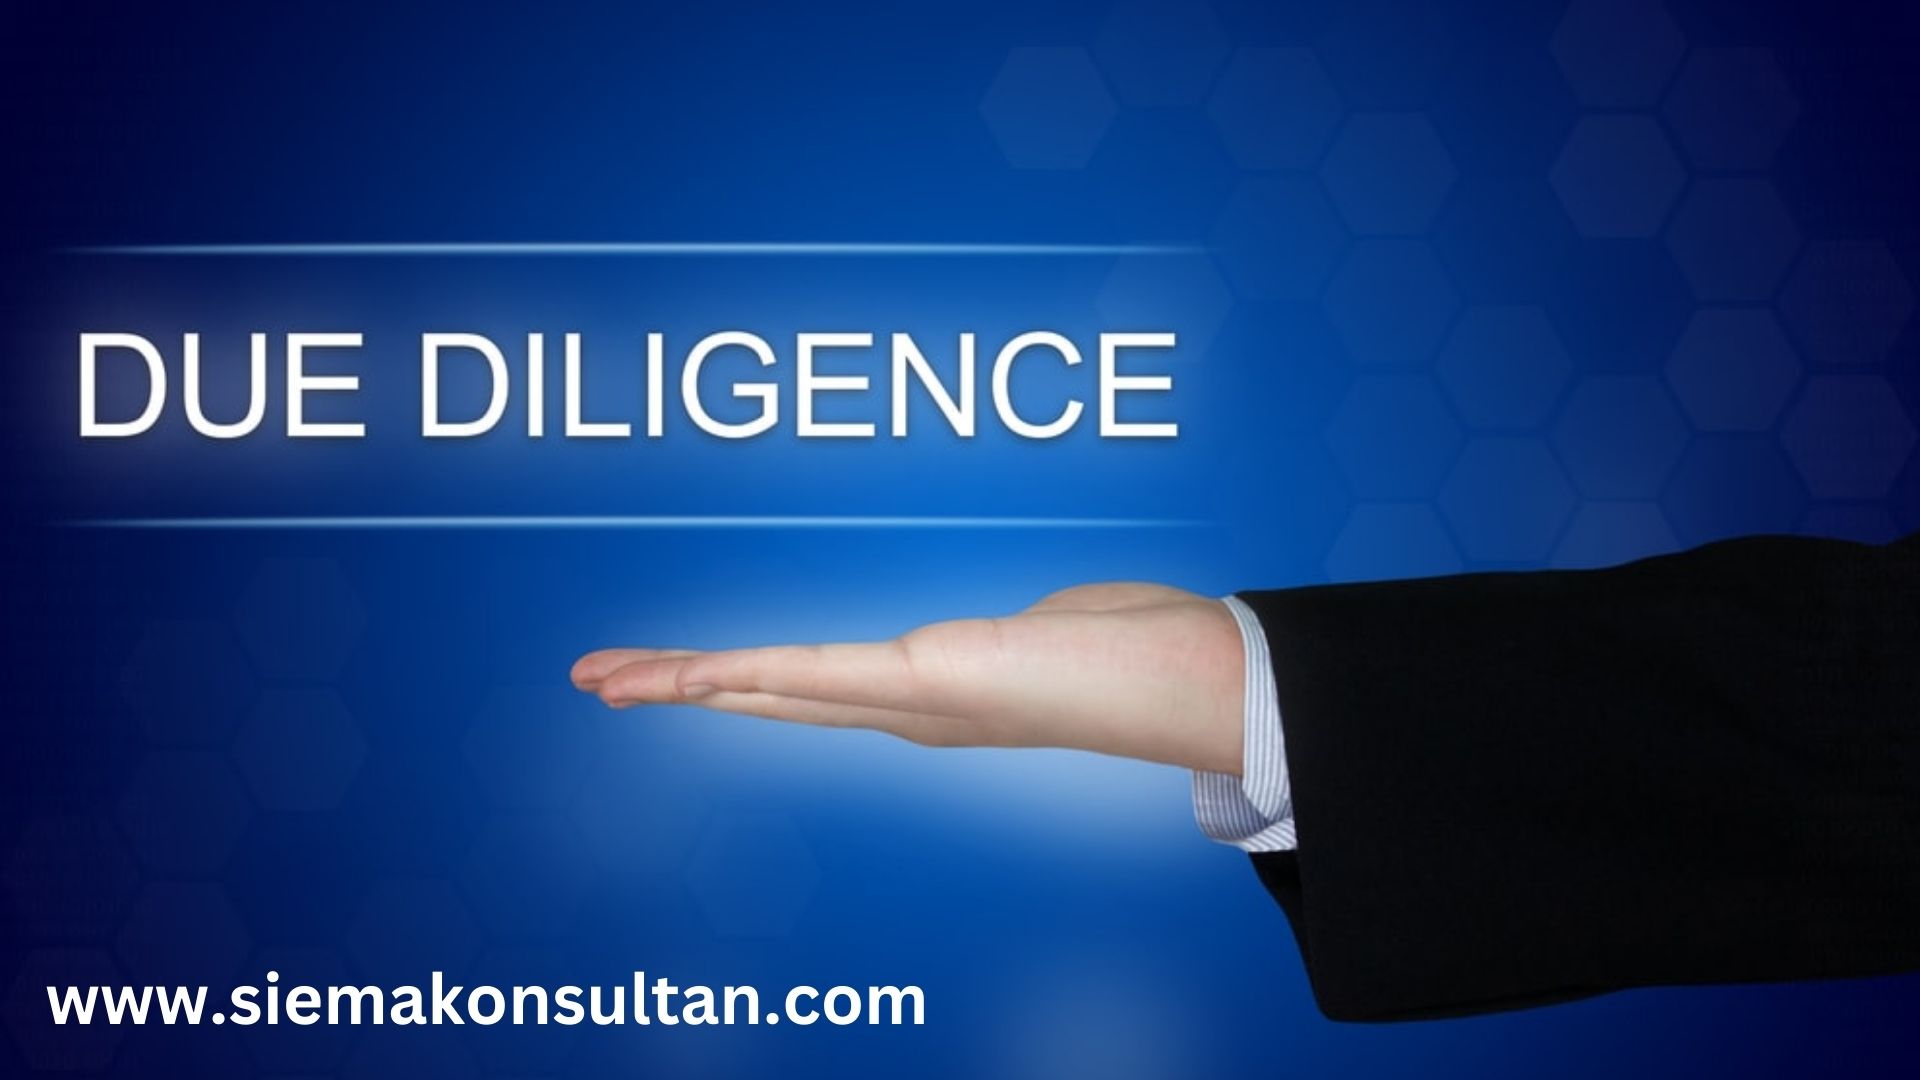 Ensure The Success of Your Business In Jakarta With Siema Konsultan's Due Diligence Services